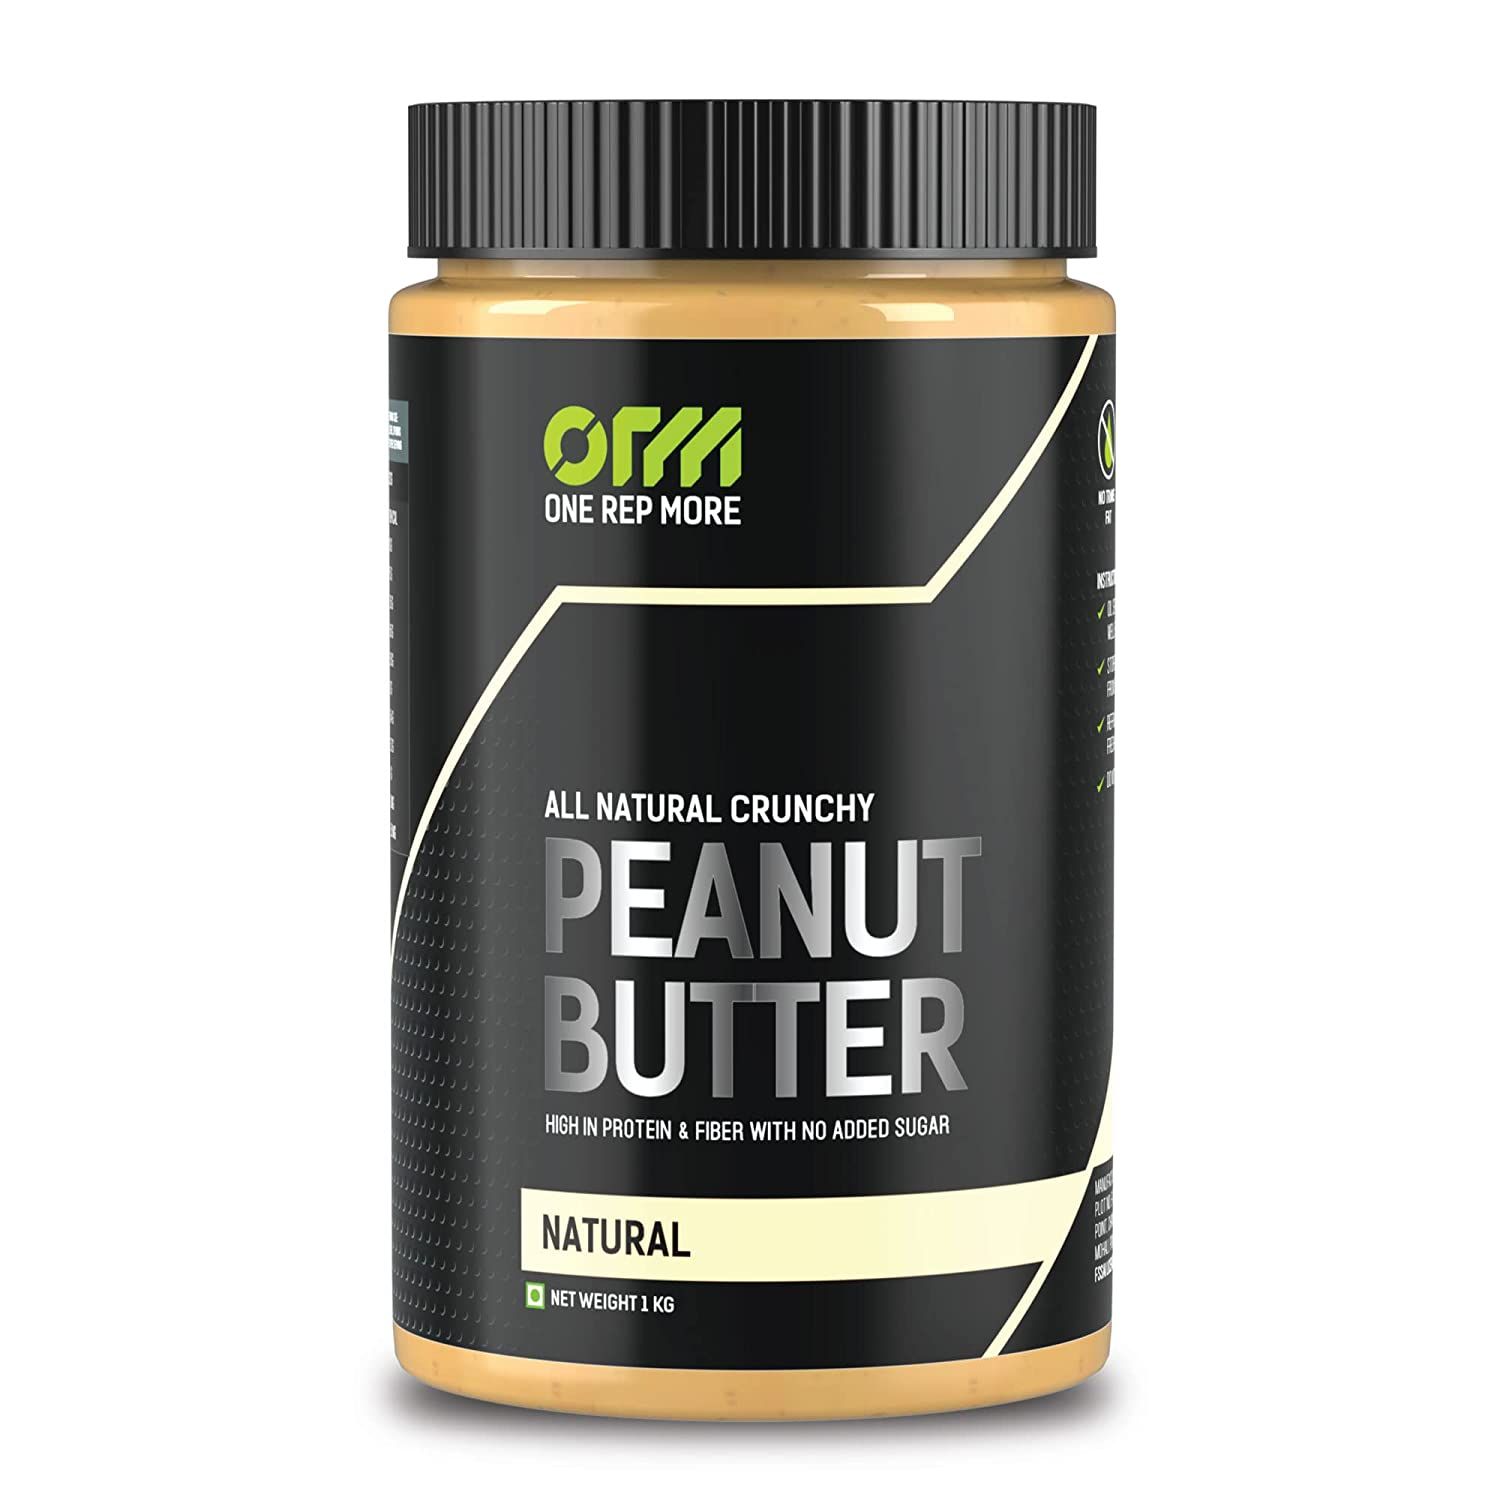 ONE REP MORE Natural Crunchy Peanut butter Image